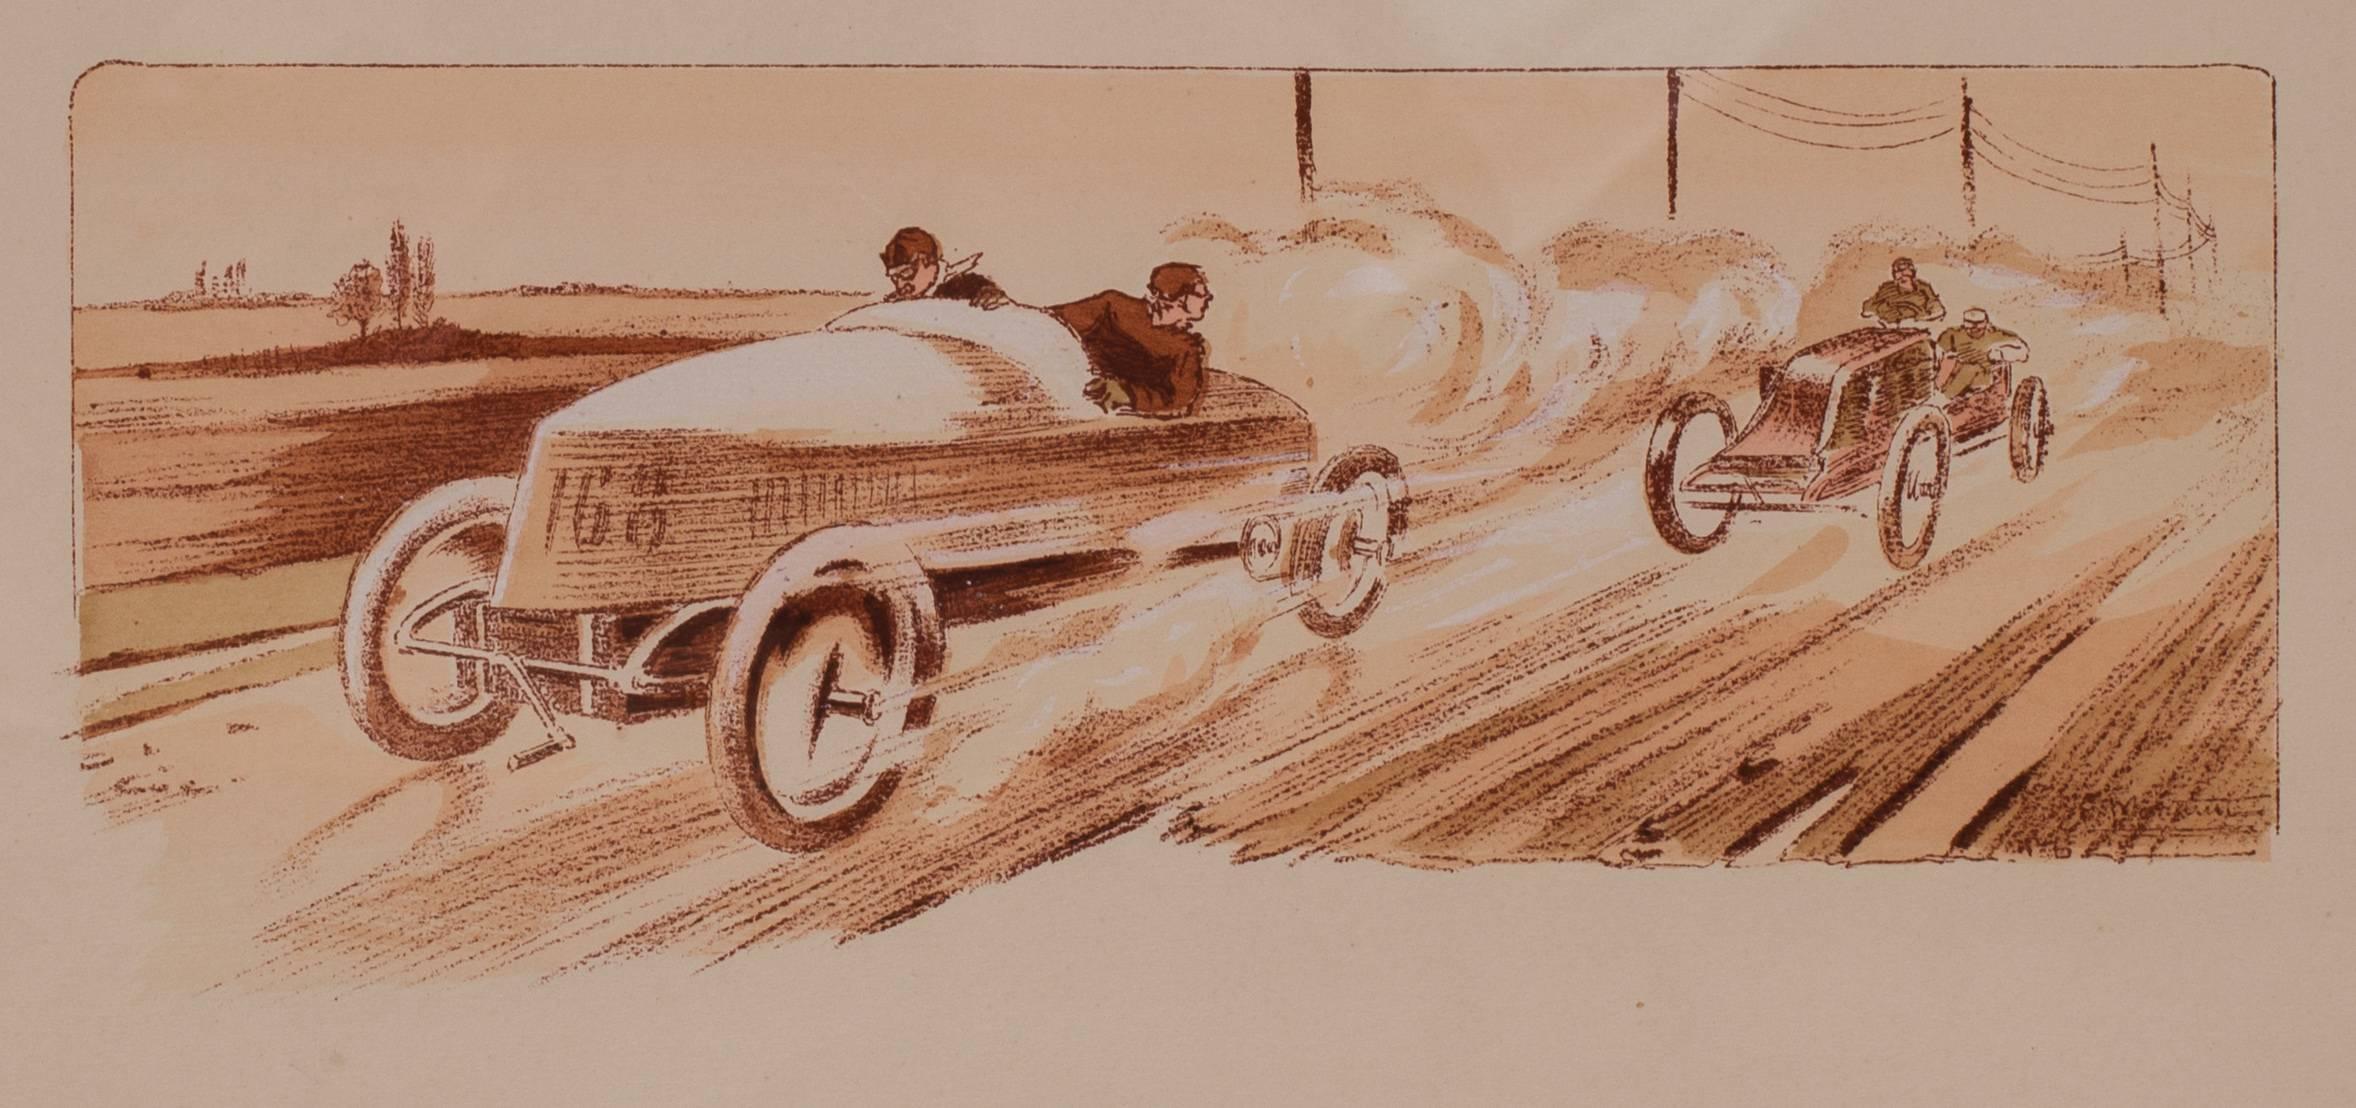 A rare and original turn of the 20th C lithograph of classic racing cars - Art Nouveau Print by Ernest Montaut